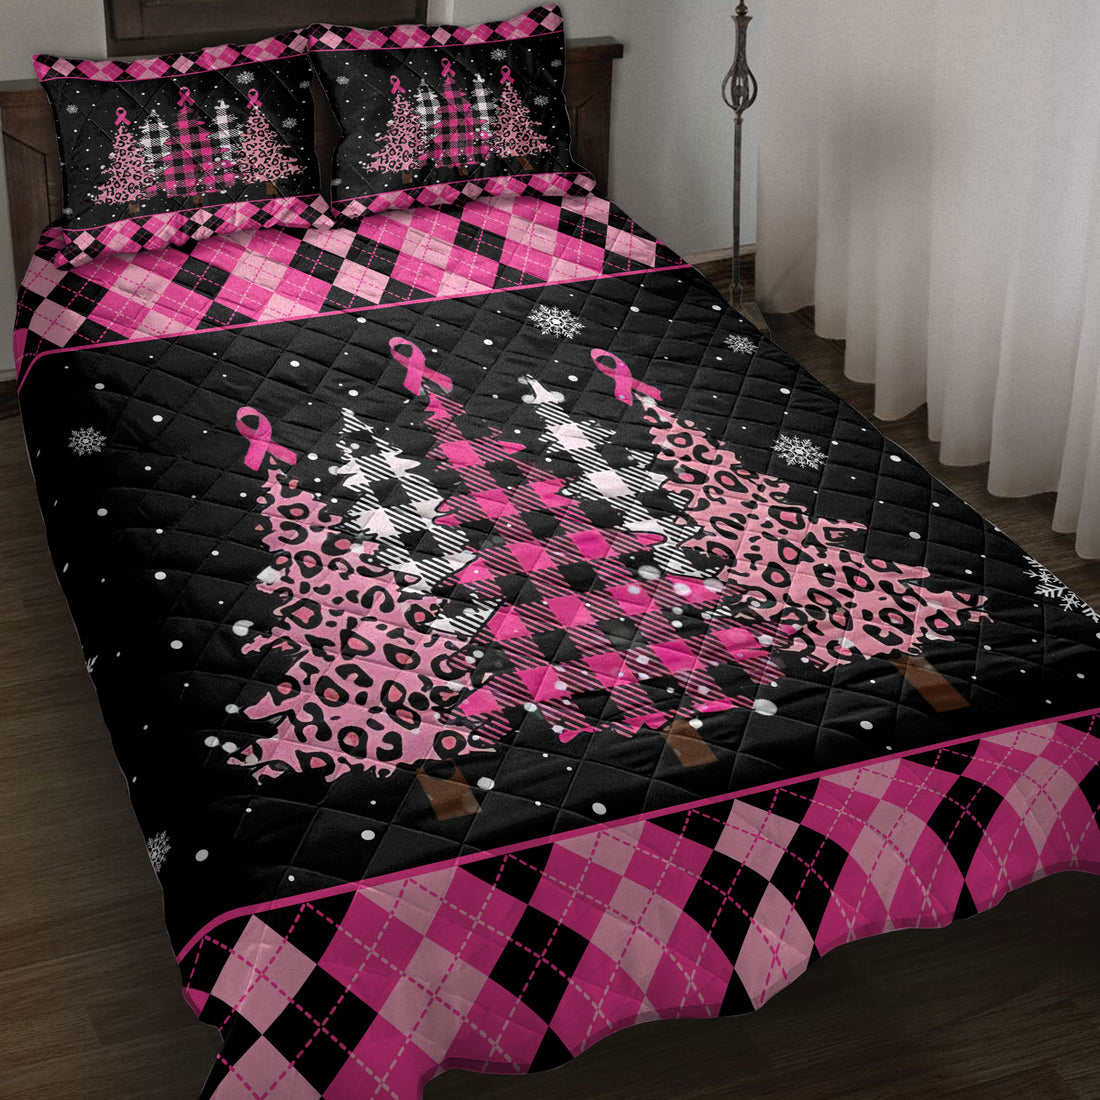 Ohaprints-Quilt-Bed-Set-Pillowcase-Breast-Cancer-Awareness-Christmas-Tree-Snowflake-Pink-Ribbon-Blanket-Bedspread-Bedding-3834-Throw (55'' x 60'')